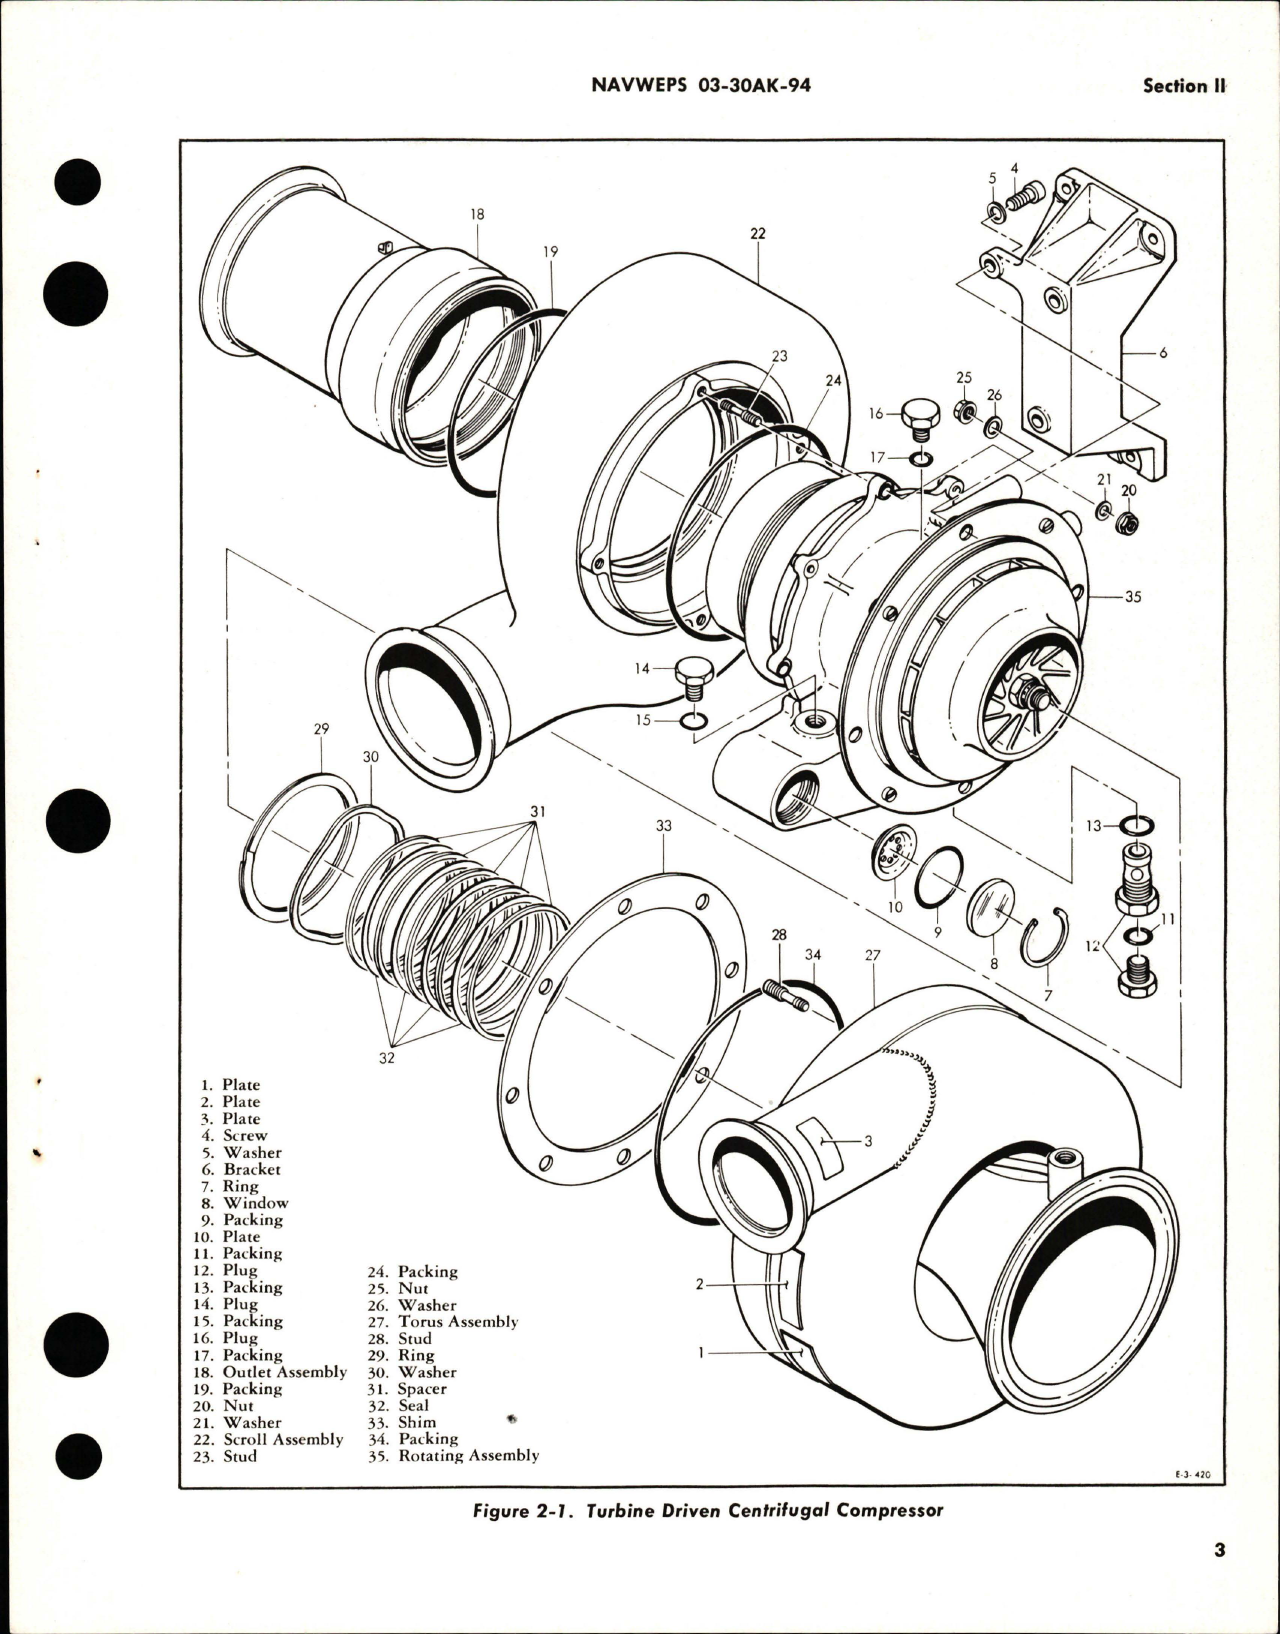 Sample page 7 from AirCorps Library document: Overhaul Instructions for Turbine Driven Centrifugal Compressor - Part 204790-1-1